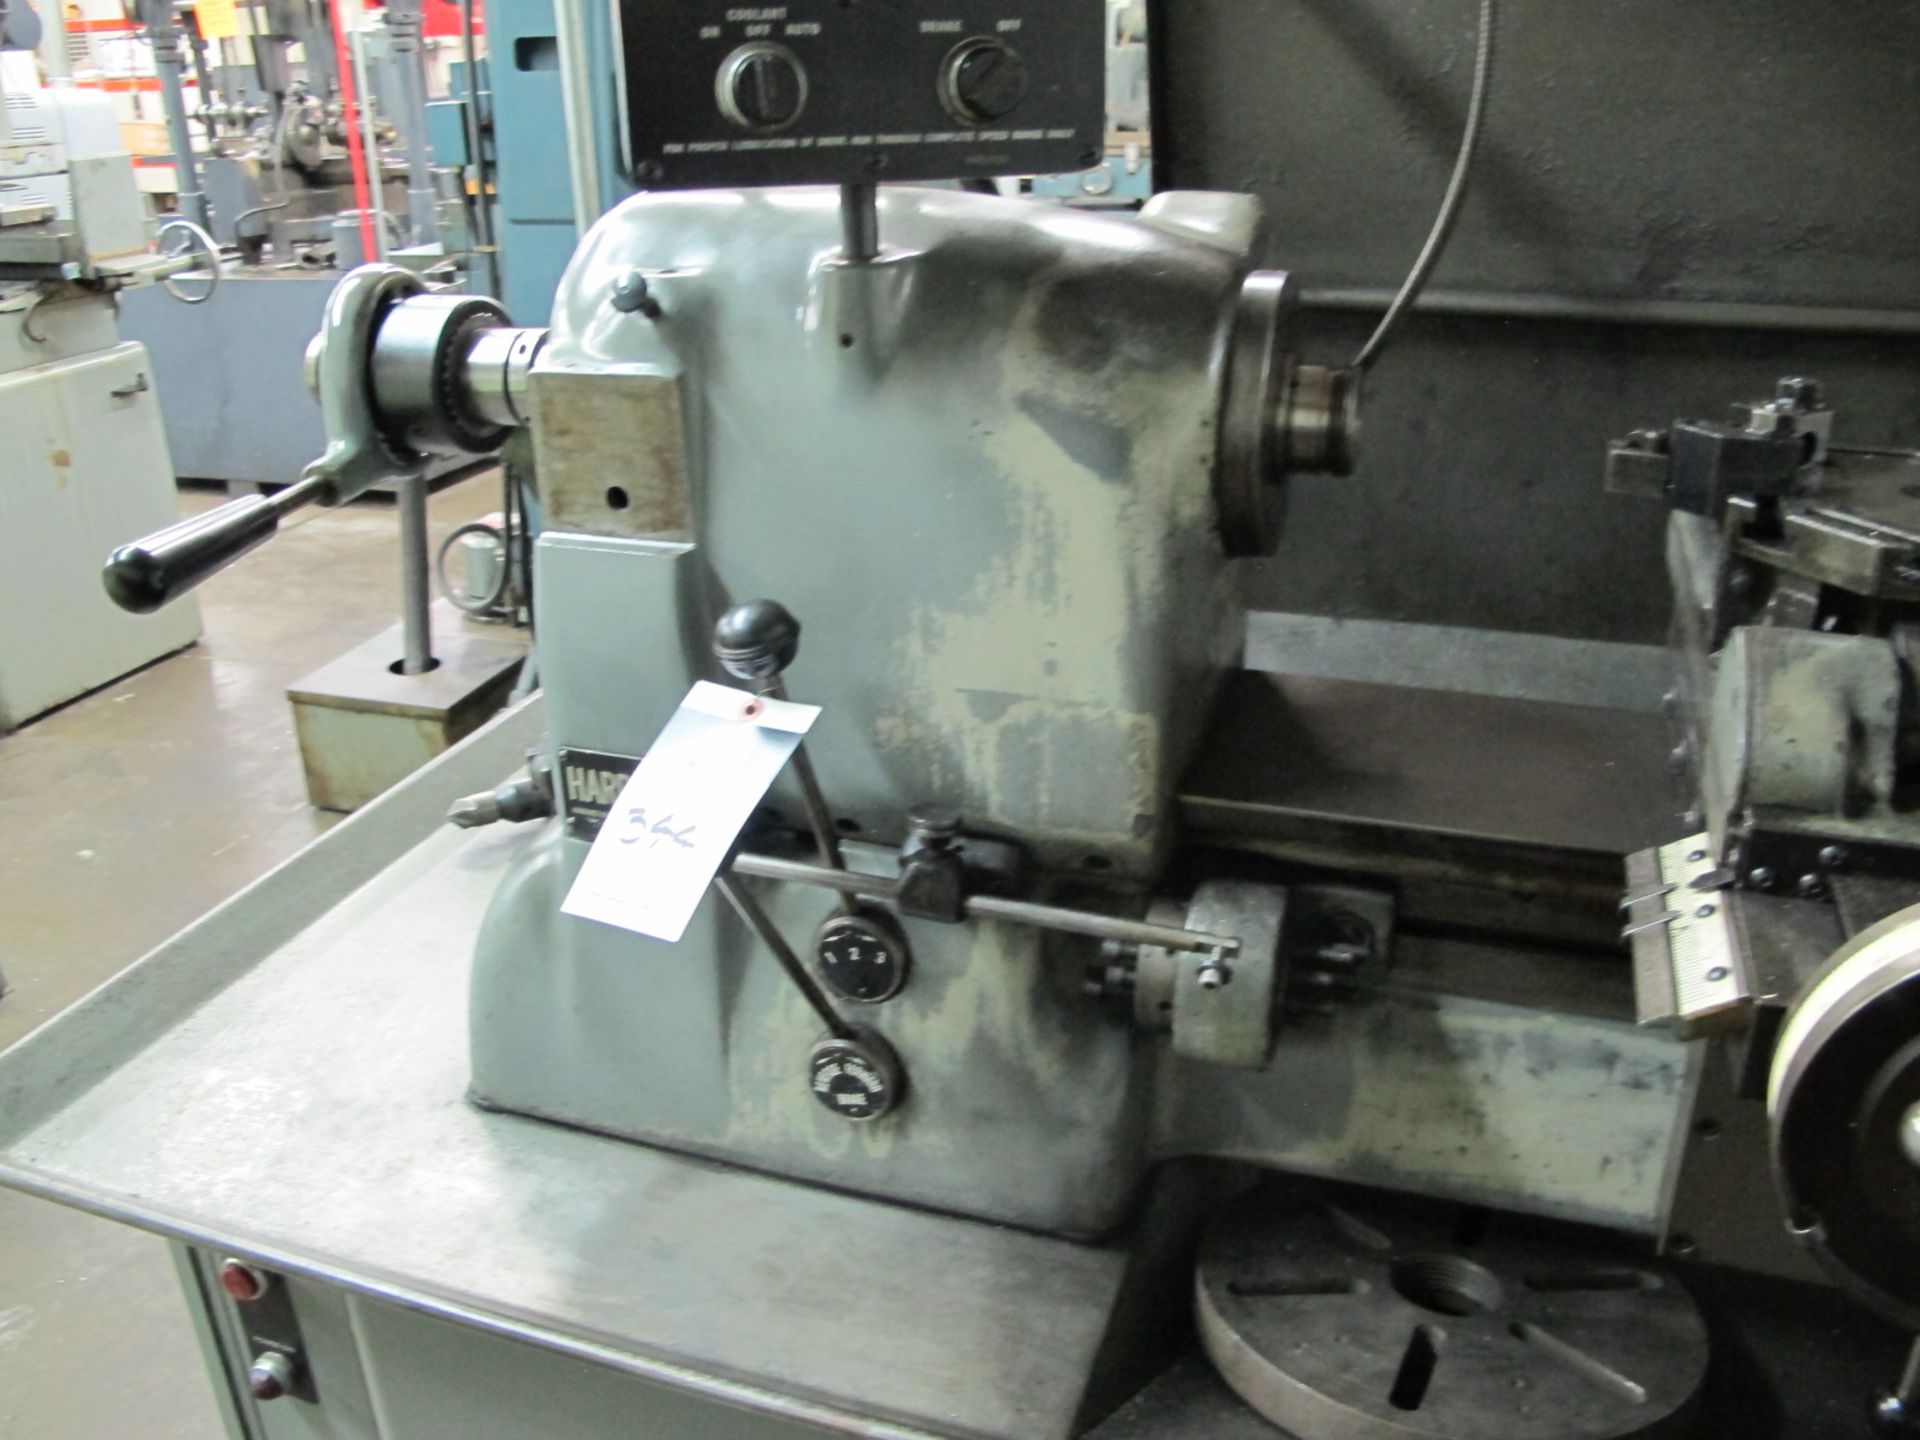 Hardinge mdl. HC Hand Chuckers w/ 125-3000 RPM, 8-Station Turret, 5C Collet Closer, Power Feeds - Image 2 of 4